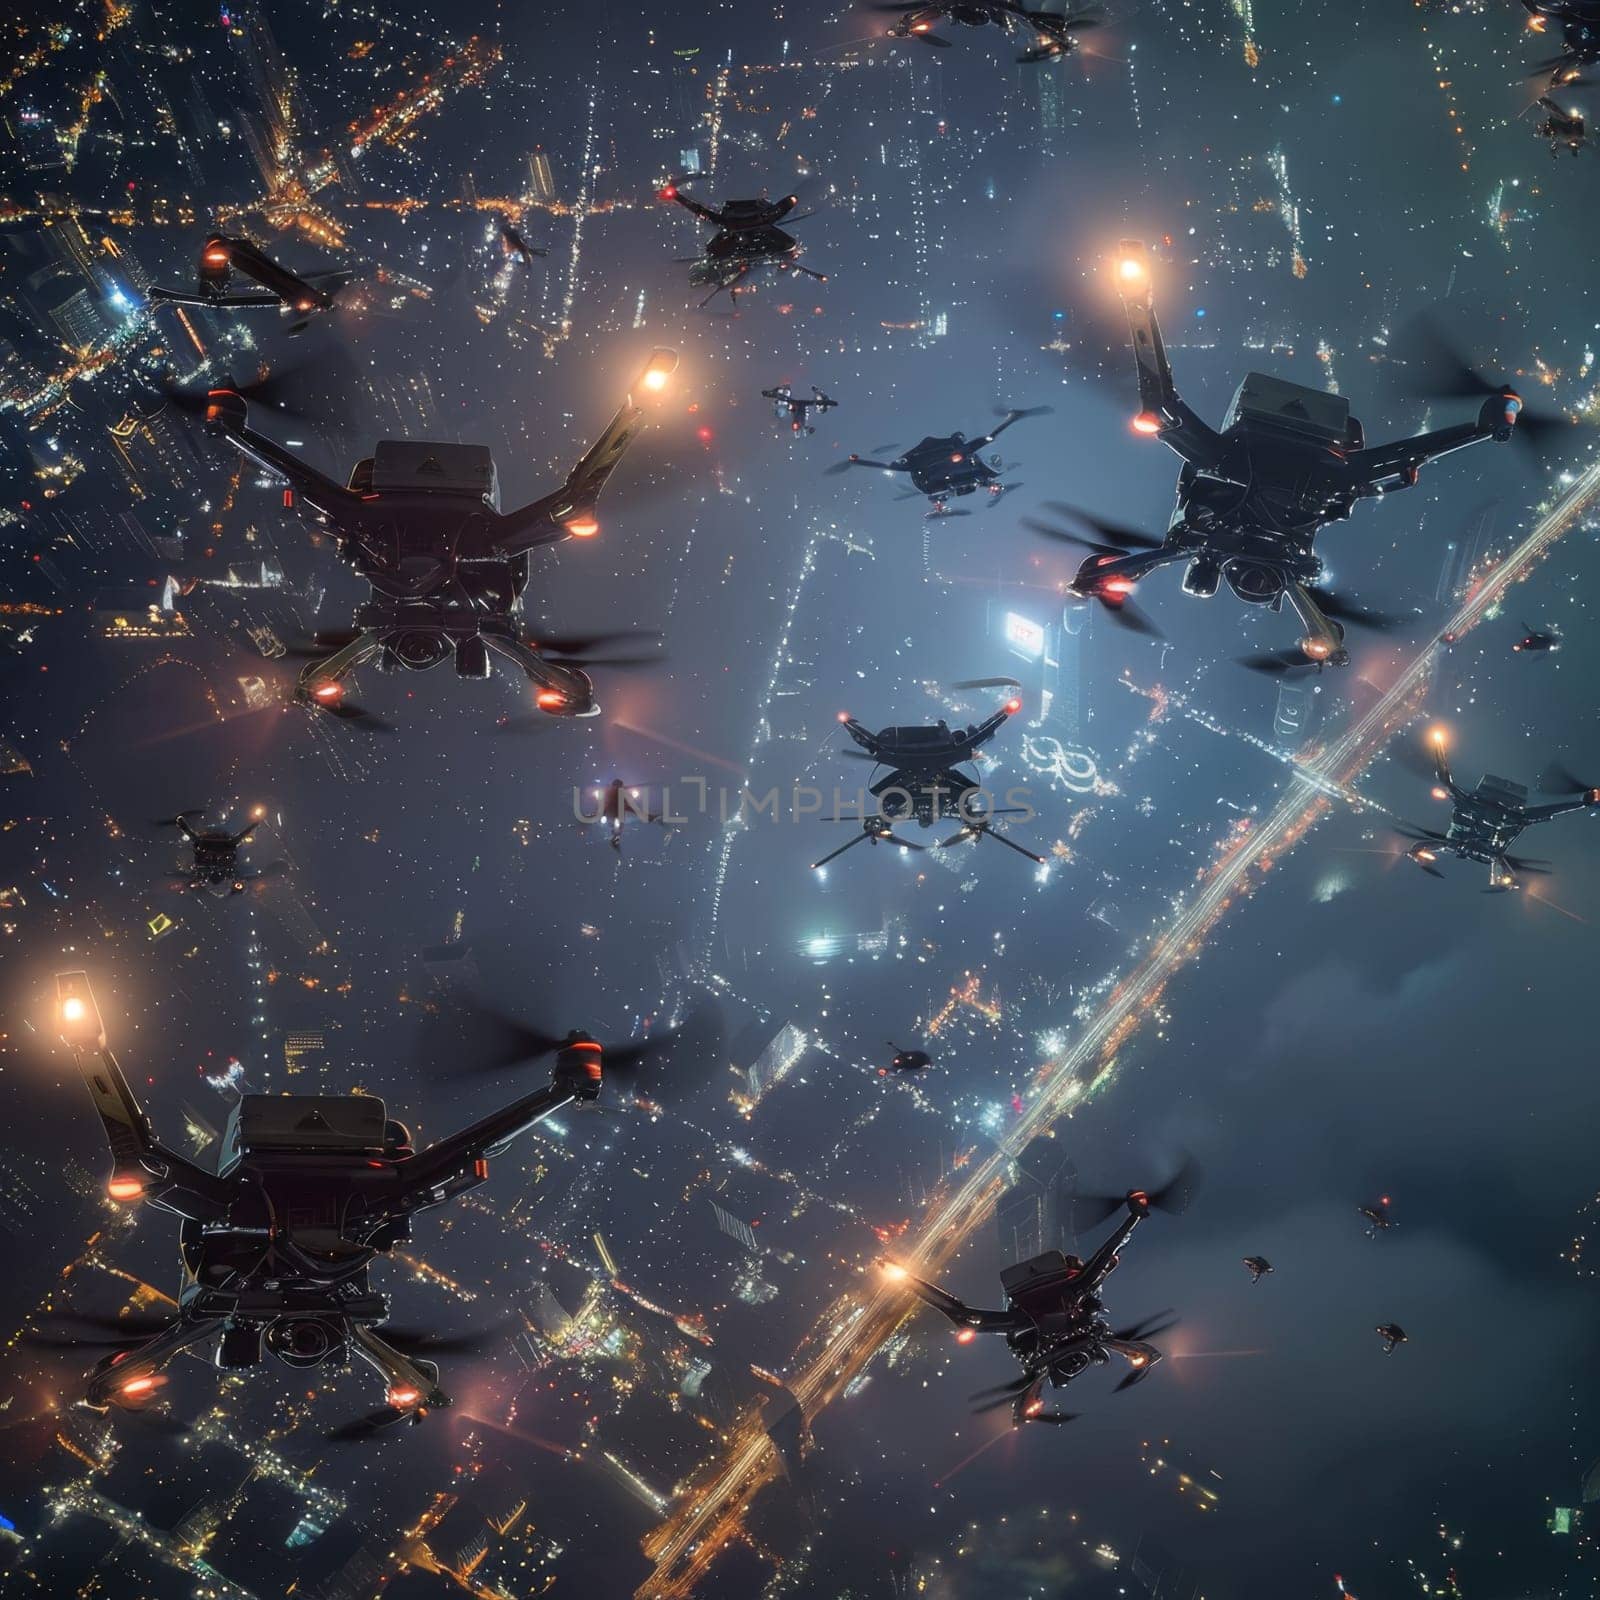 Quadrocopters patrol over the city at night by Lobachad